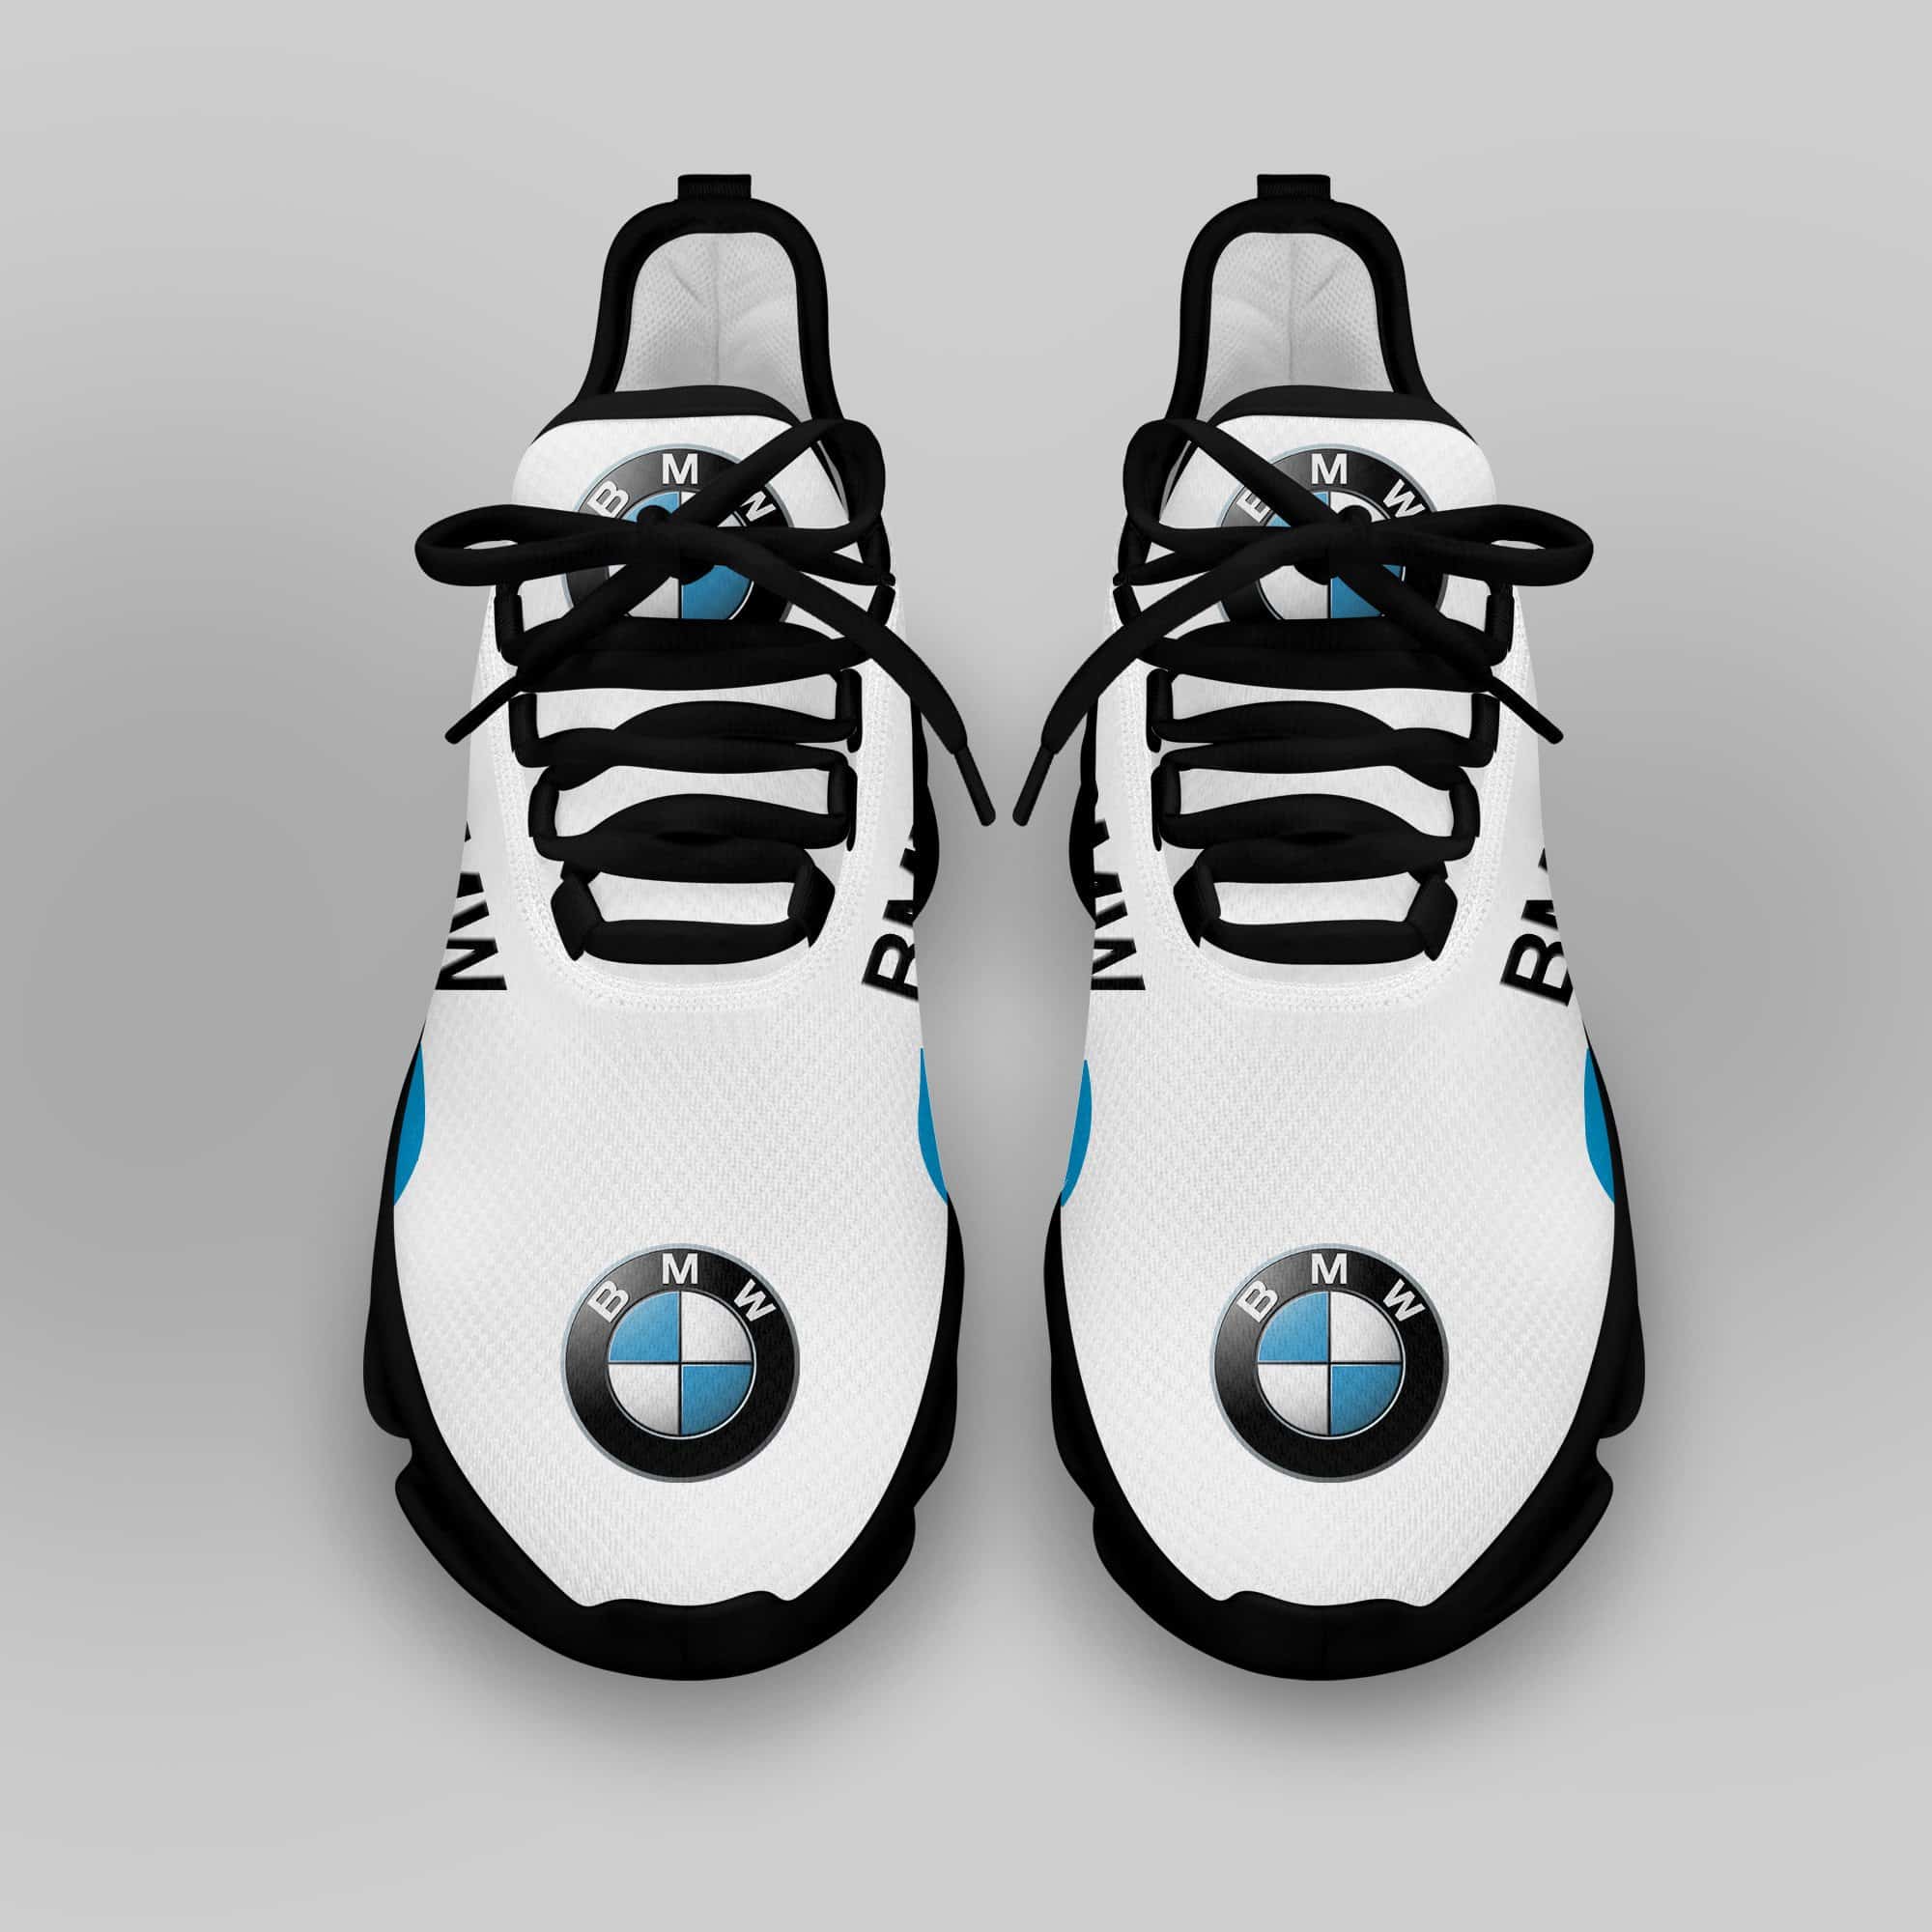 Bmw Running Shoes Max Soul Shoes Sneakers Ver 53 4